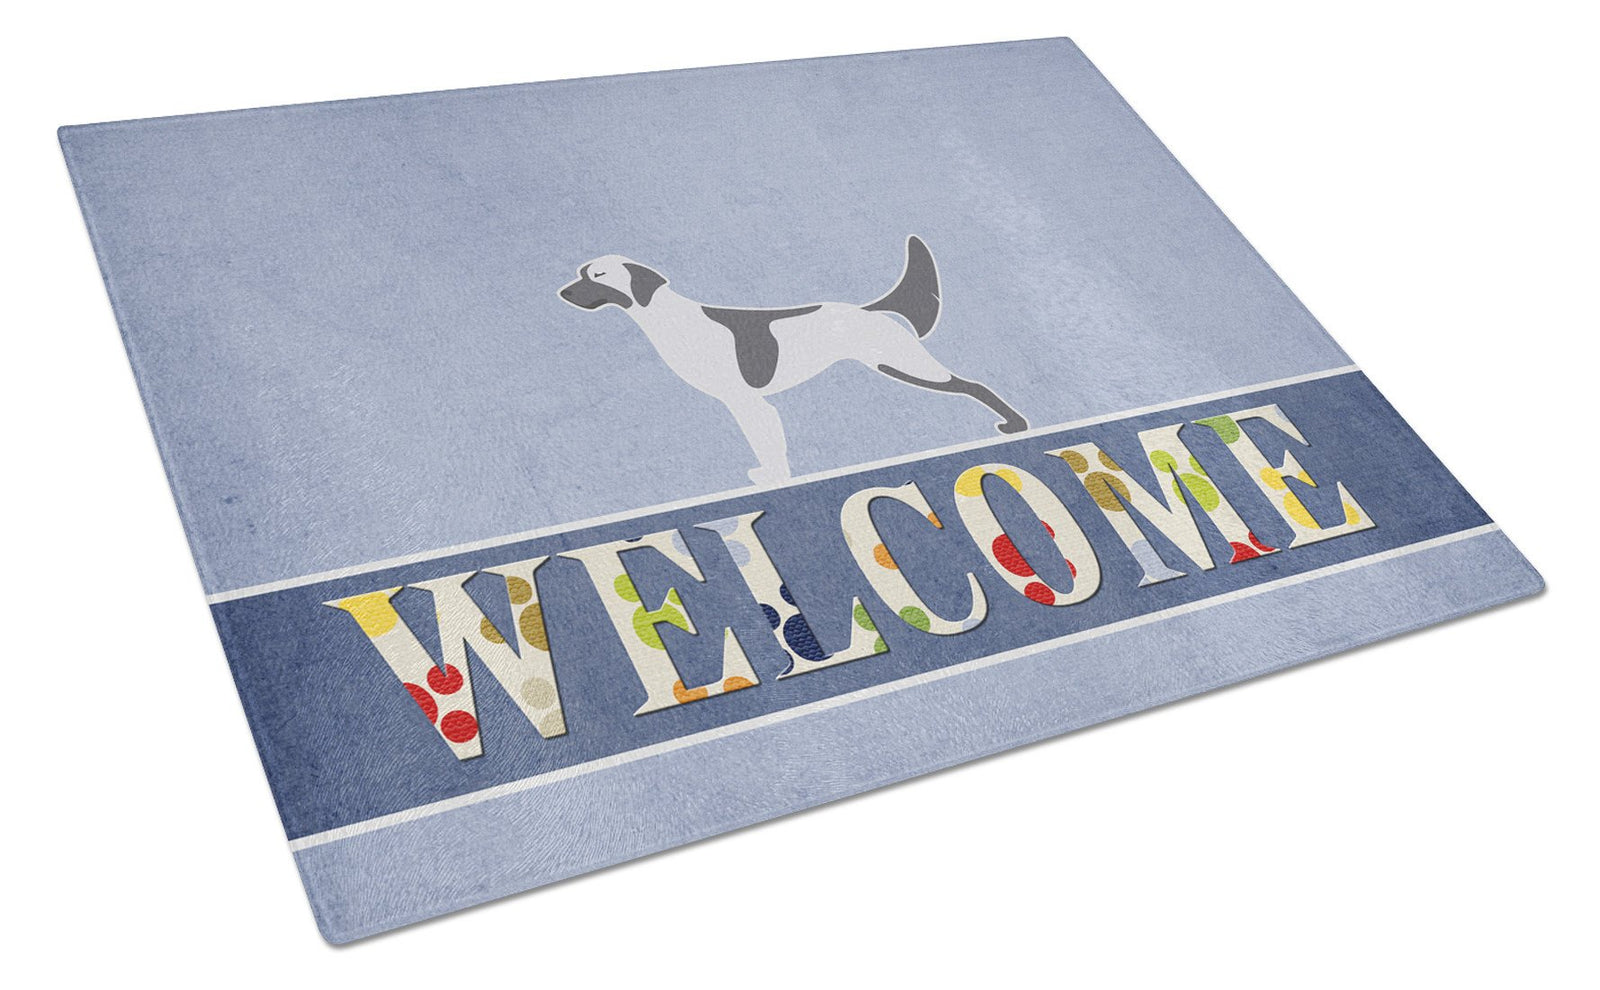 English Setter Welcome Glass Cutting Board Large BB5485LCB by Caroline's Treasures